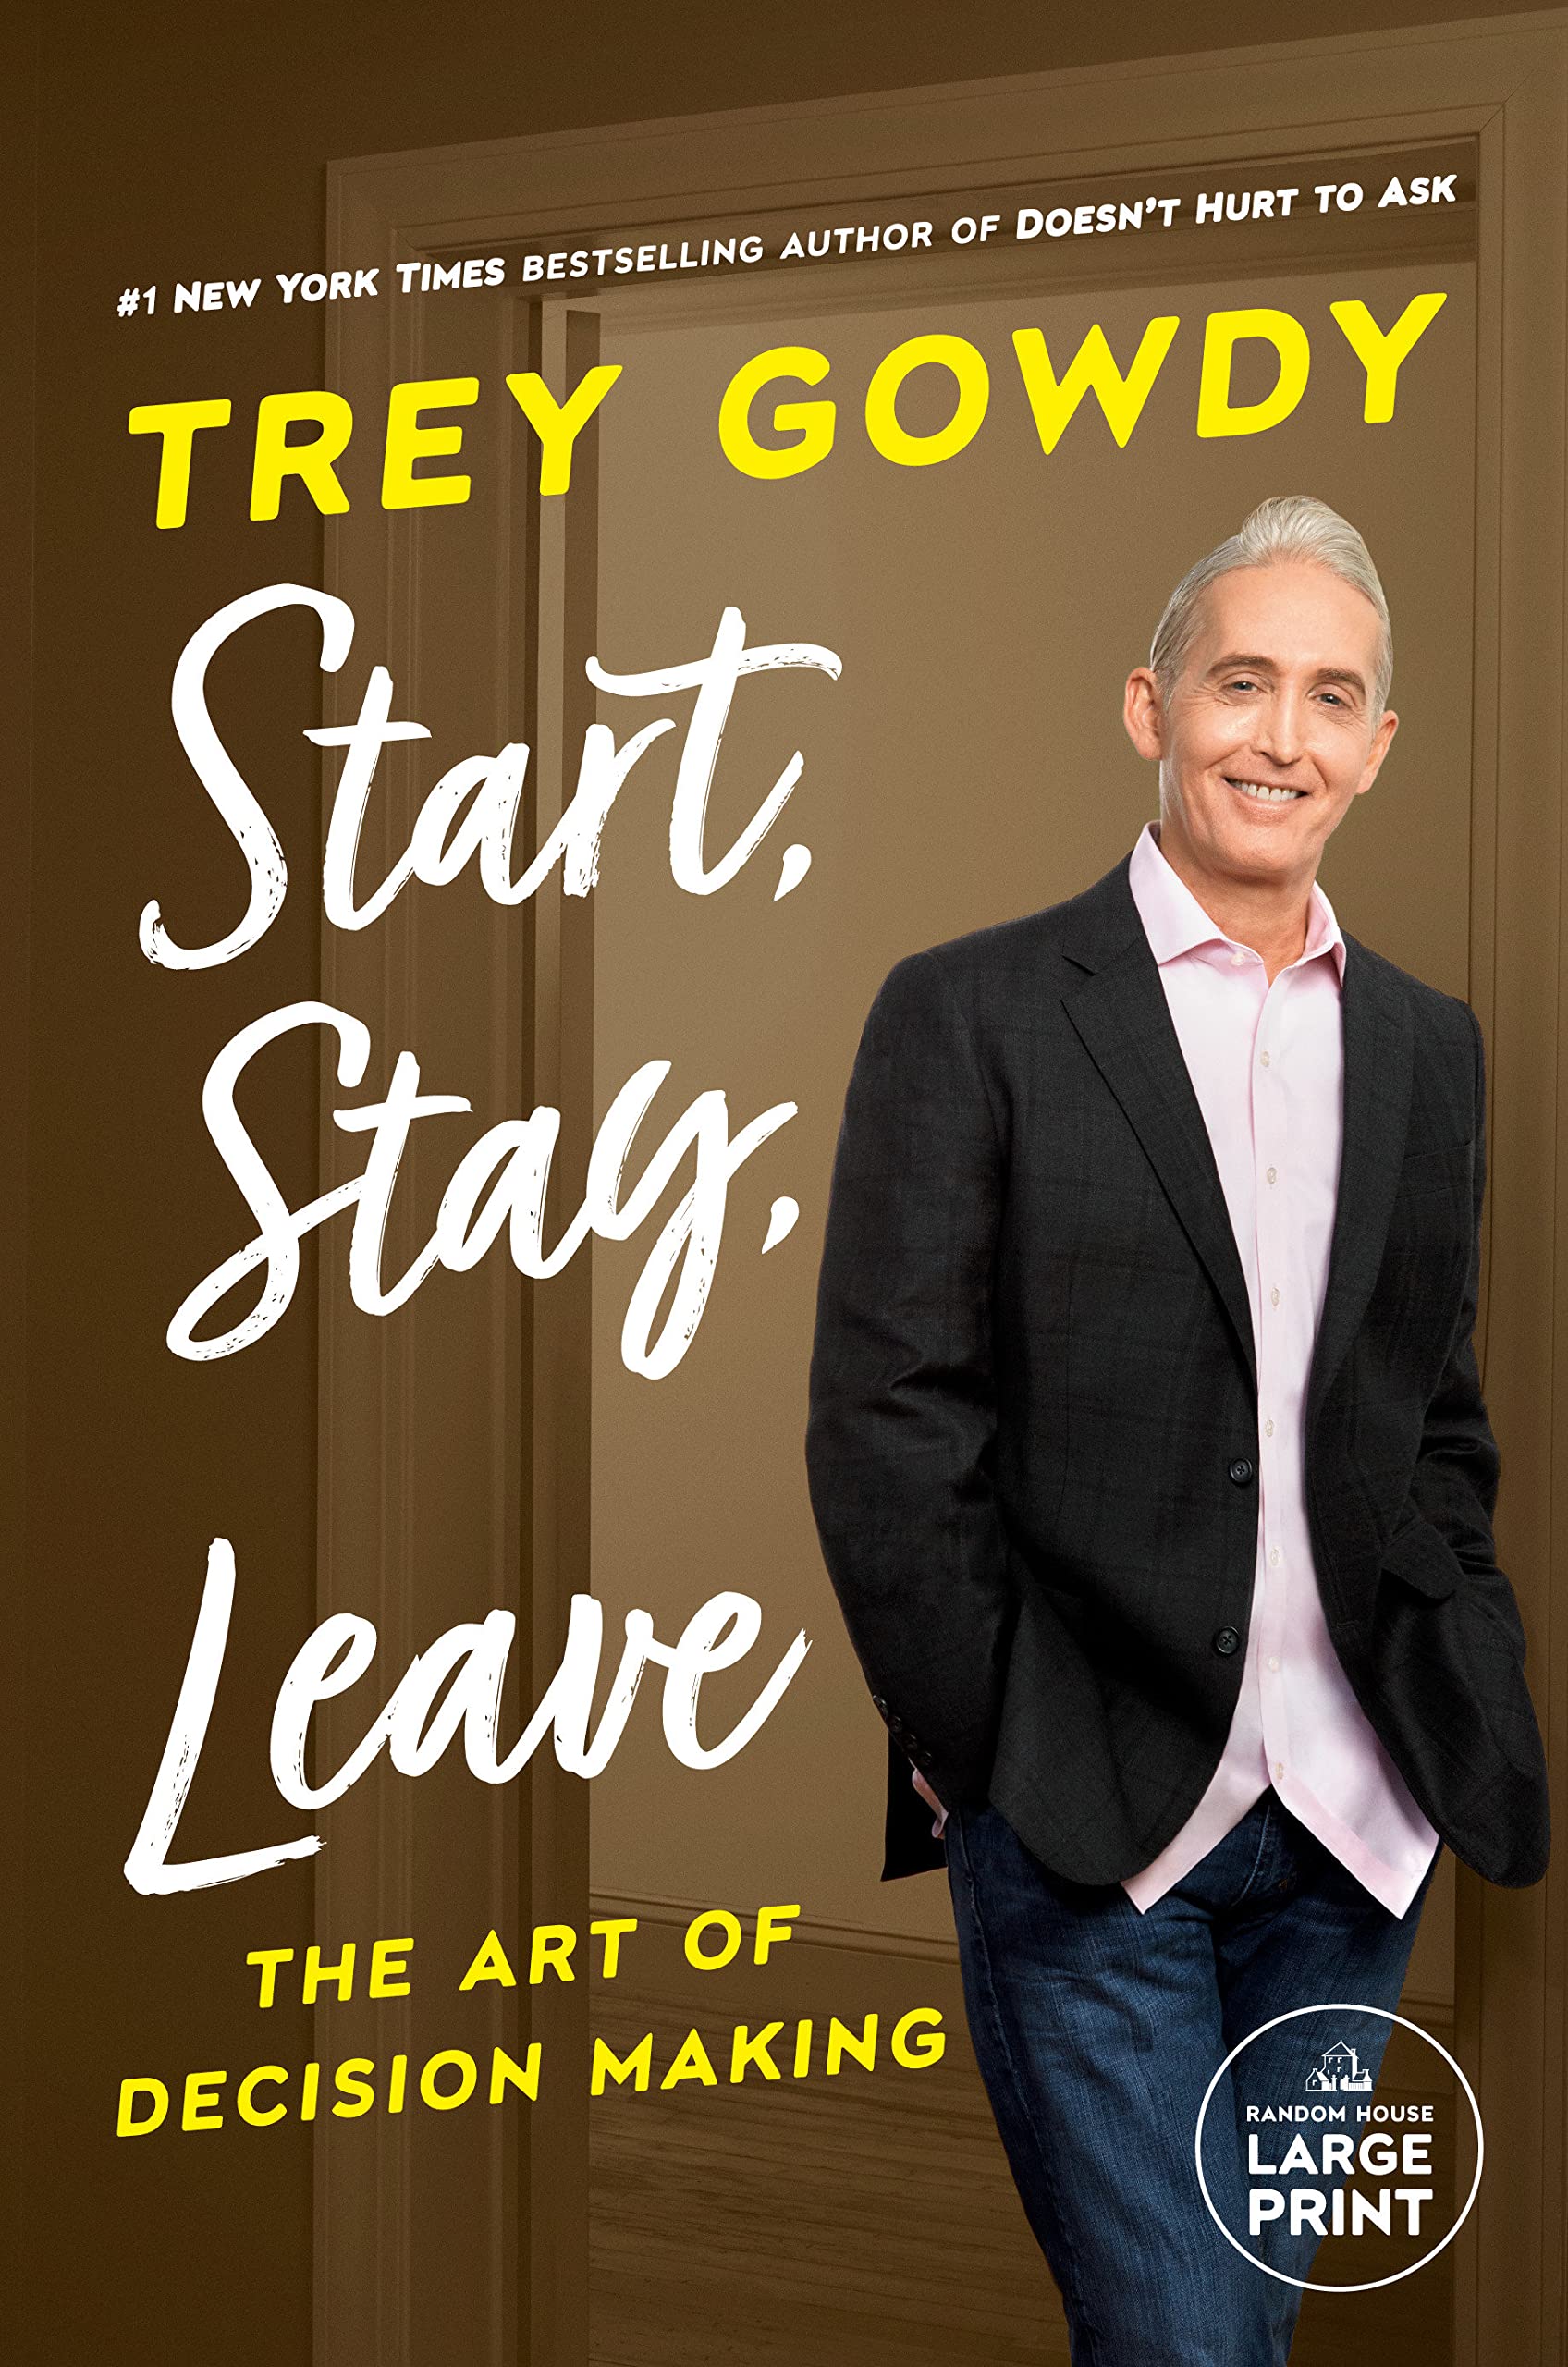 Start, Stay, or Leave: The Art of Decision Making (Random House Large Print)